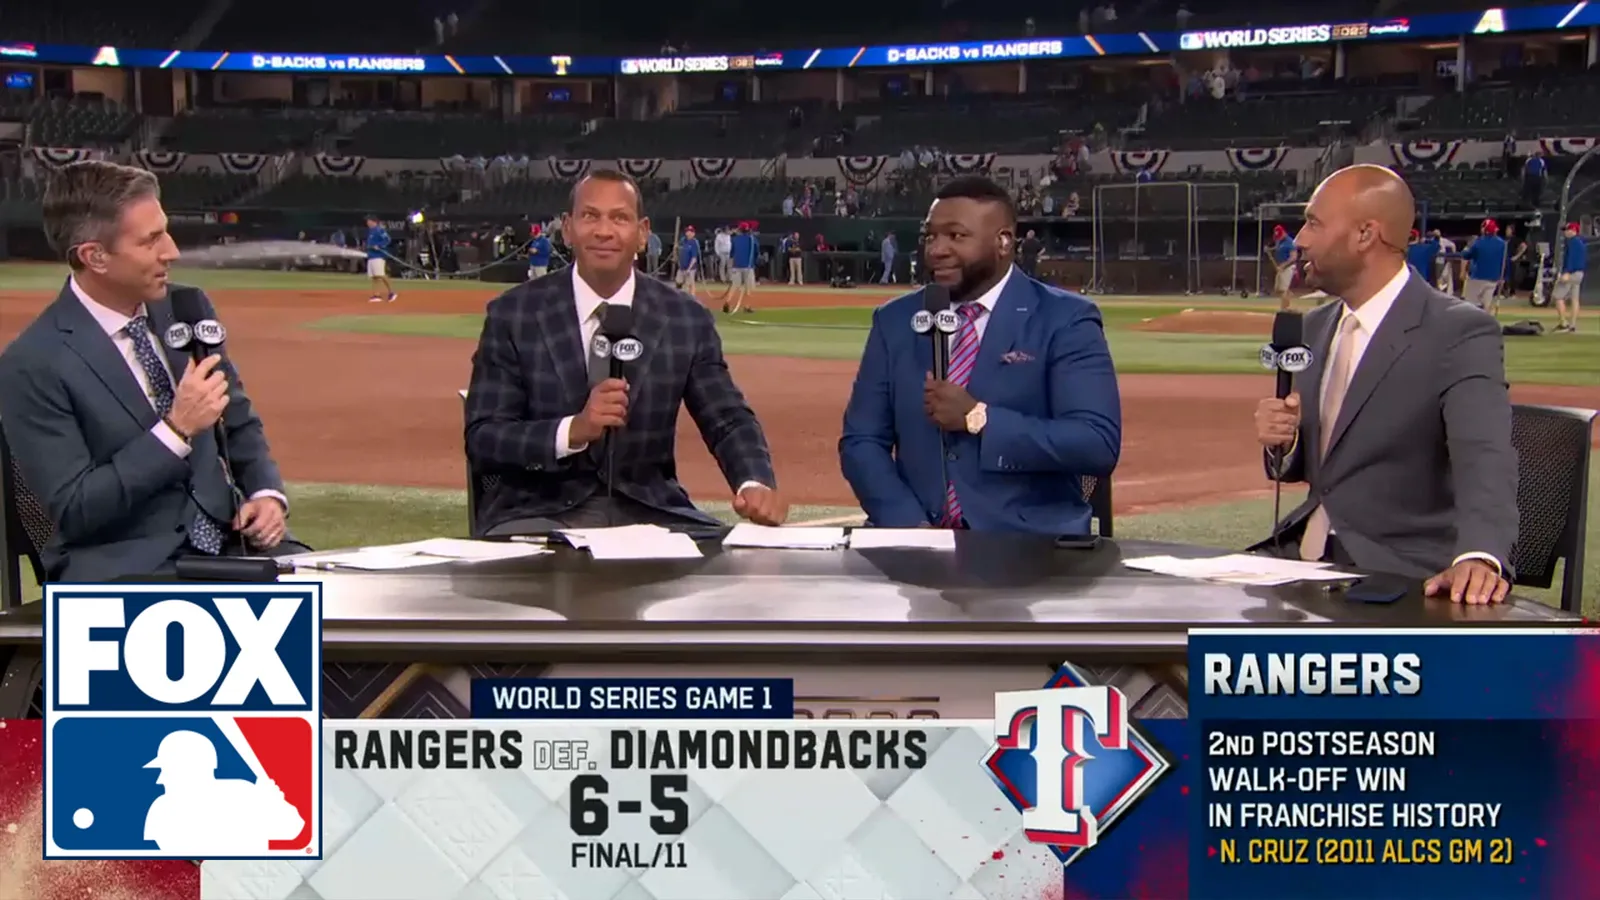 Rangers top D-backs in WS Game 1: Jeter, Big Papi & A-Rod react